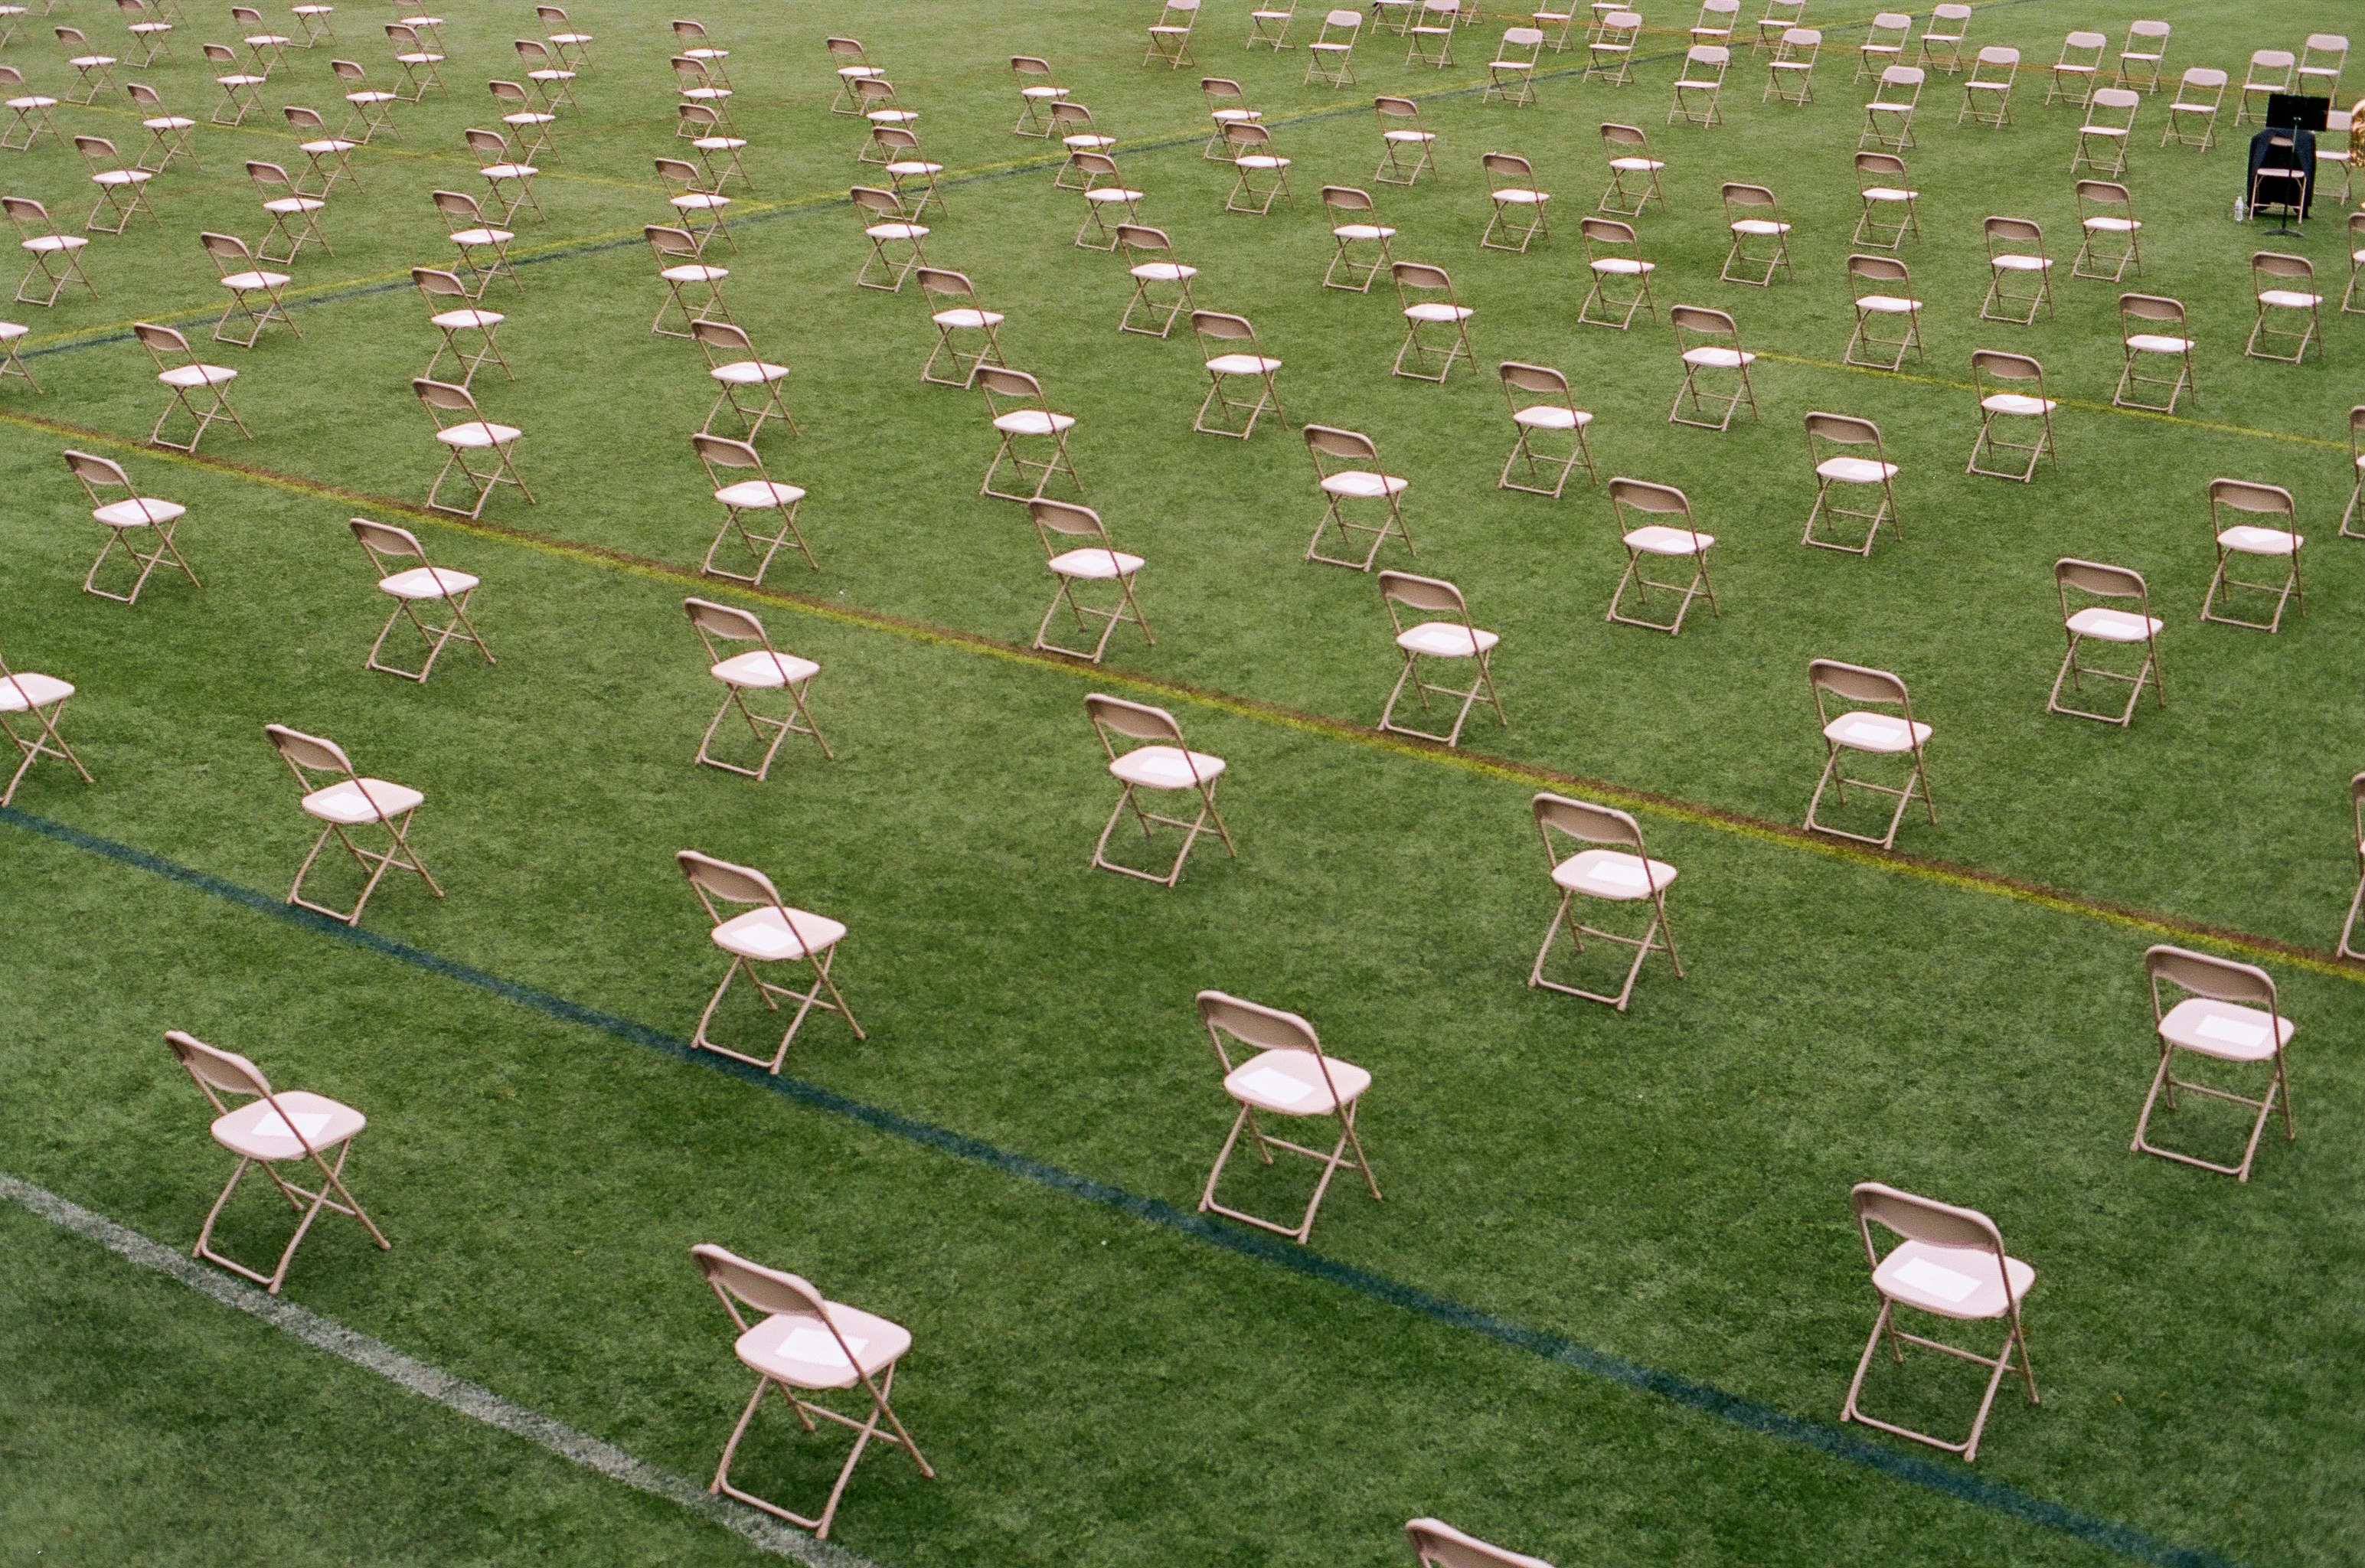 Socially distanced chairs on a field